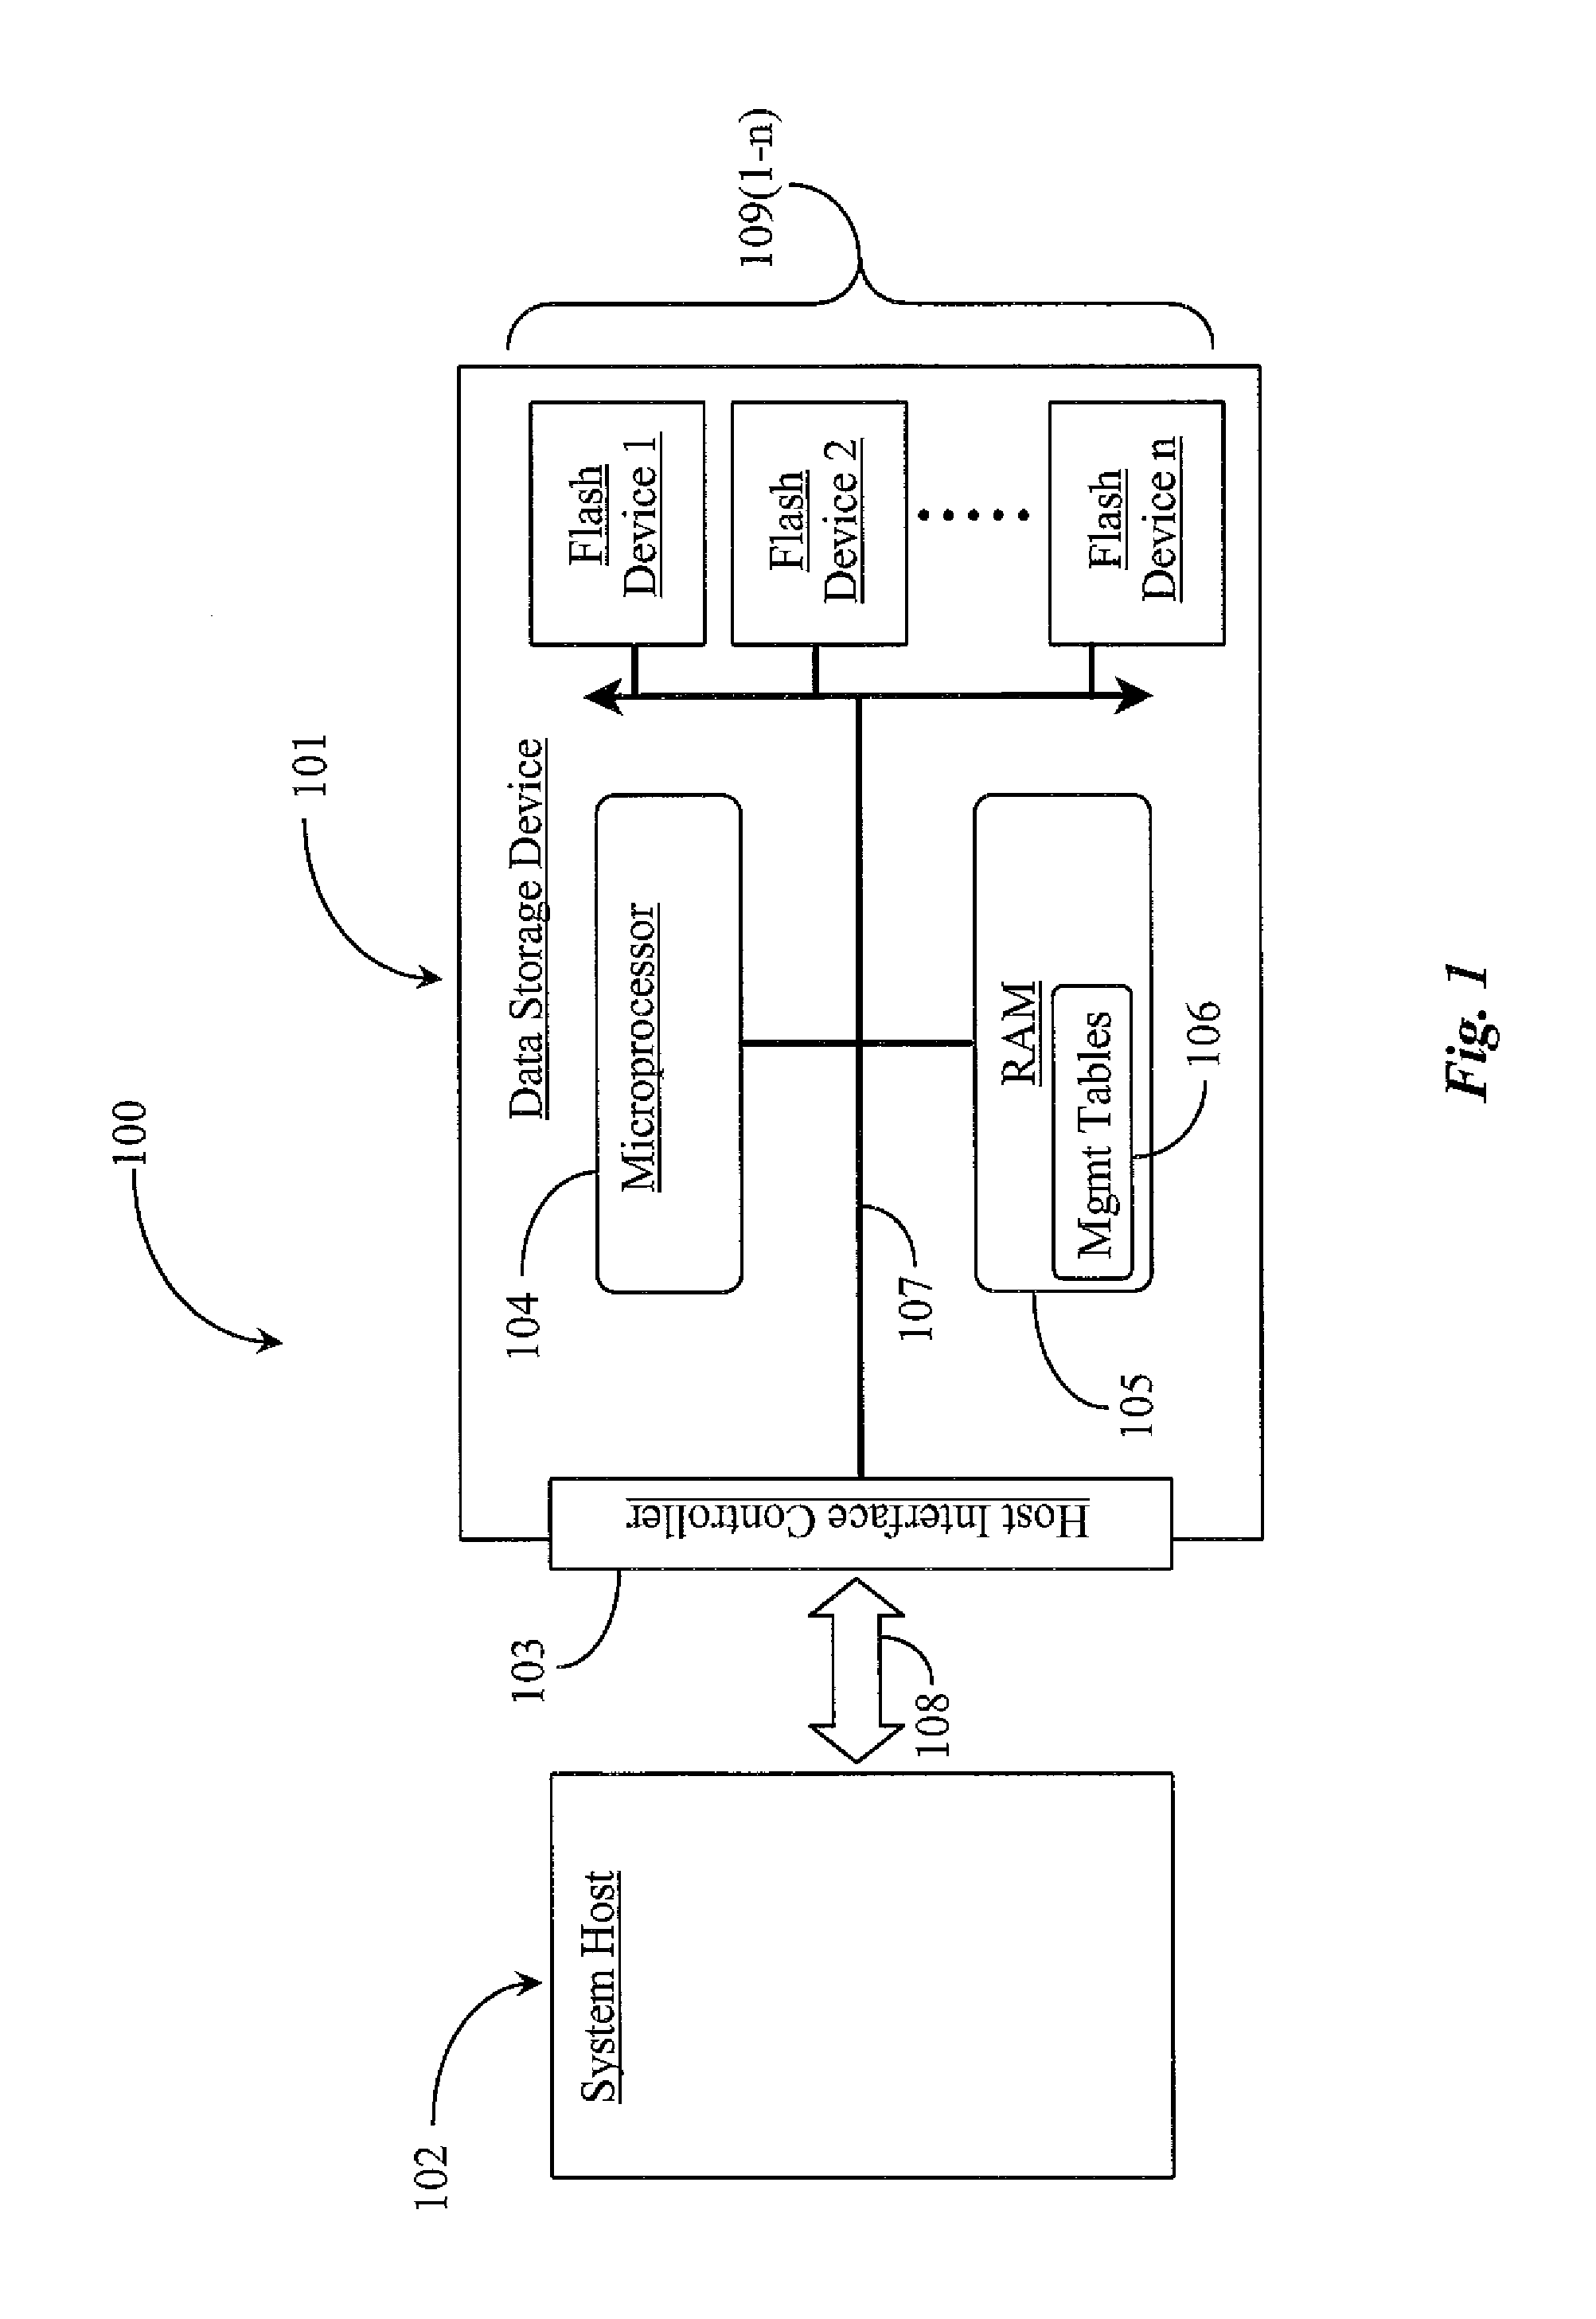 Method for Managing Memory Access and Task Distribution on a Multi-Processor Storage Device